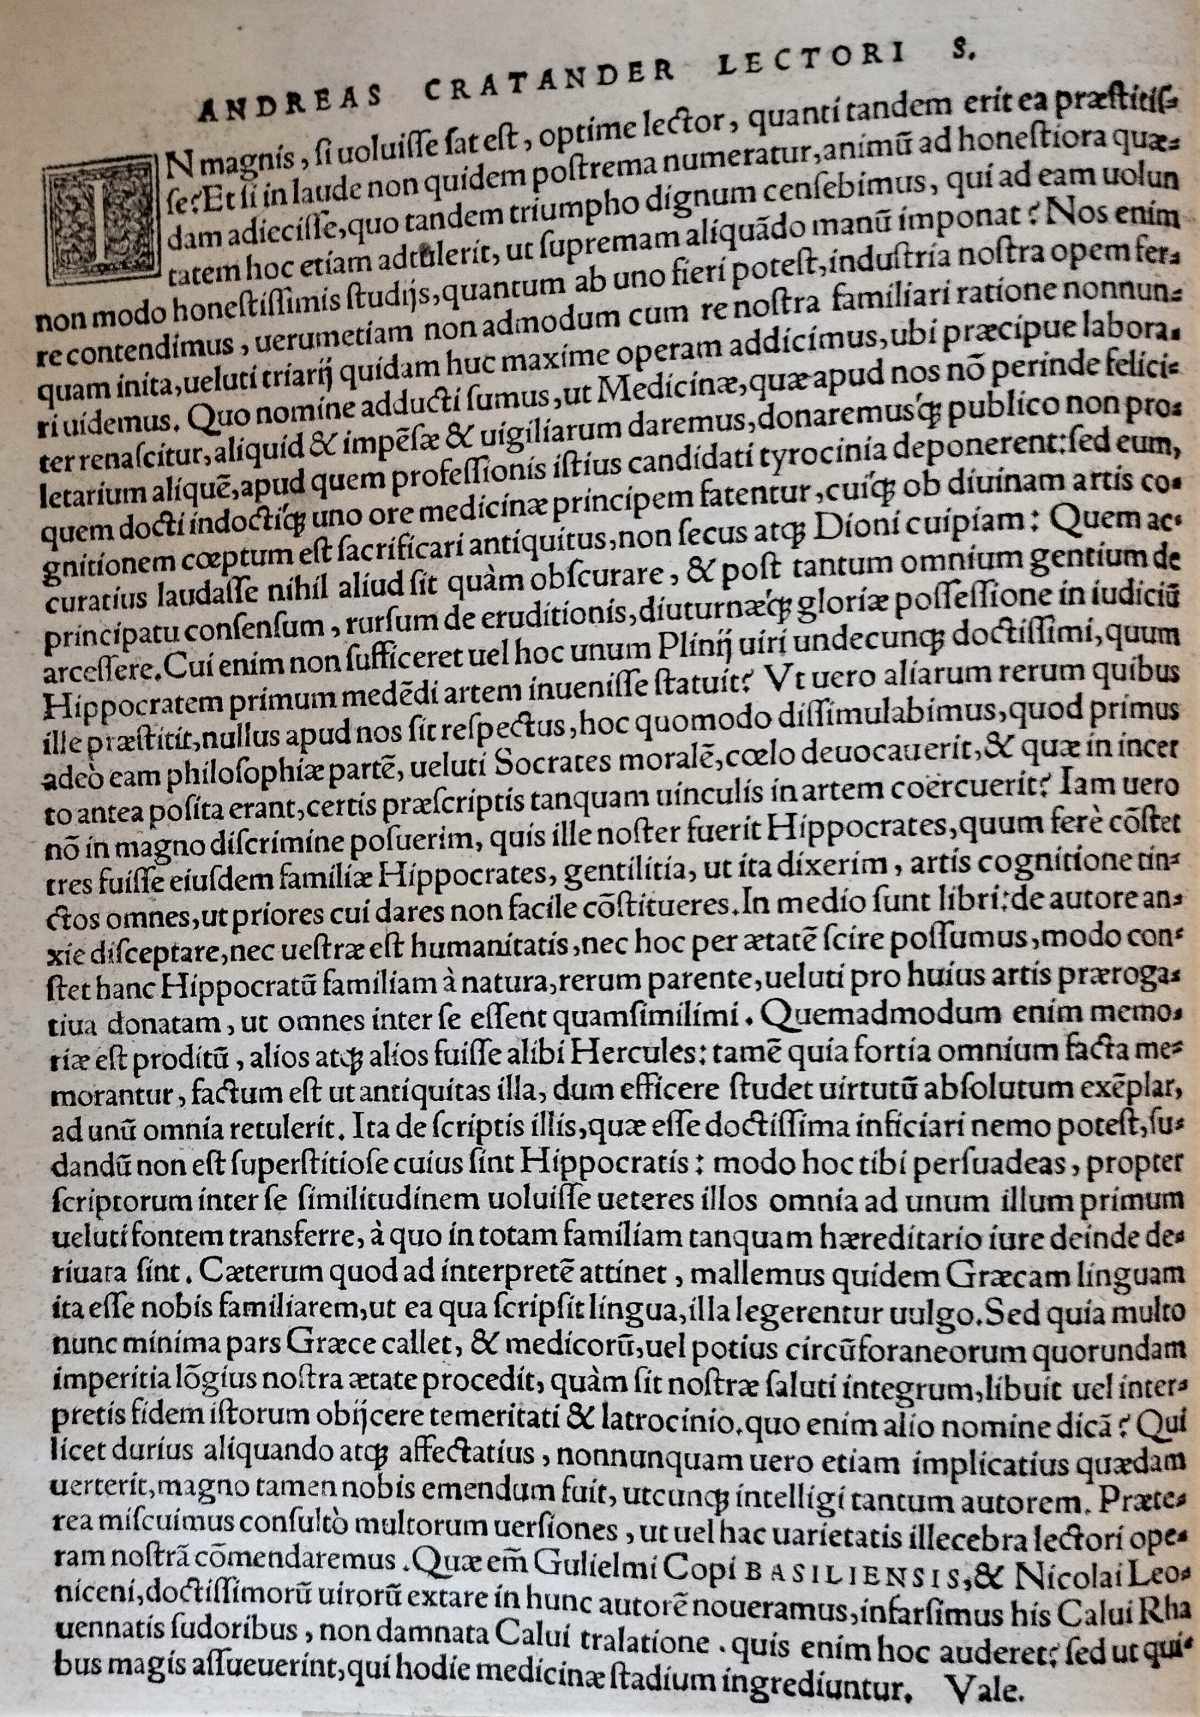 Page from the book, text in Latin. 